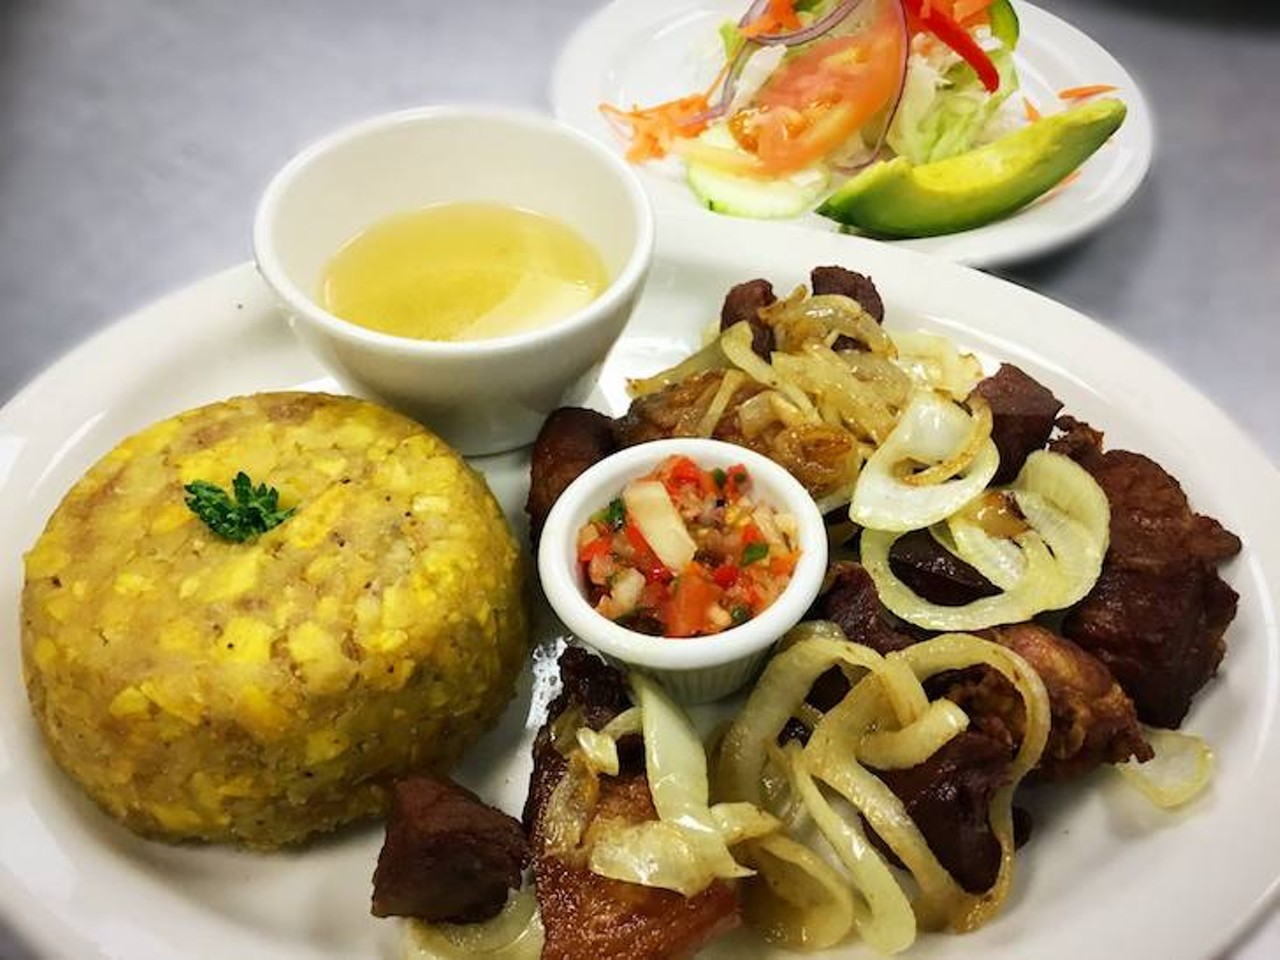 Mi Viejo San Juan Restaurant 
7229 E. Colonial Drive, 407-380-2061
Straight-up Puerto Rican meat & seafood dishes delivered in an intimate, family-run environment. They offer a soup of the day, and some of their specialities include: chuleta can can (which is a rib/pork chop), mofongo seasoned in house condiments, fried red snapper, and their Mariscada, a seafood salad of conch, octopus and shrimp. The staff says they work for your praise and aims to make sure your experience is flawless. They have a great reputation for bringing the authentic flavor and atmosphere that takes us back to the island.
Photo via Mi Viejo San Juan/MiViejoSanJuanRest.com